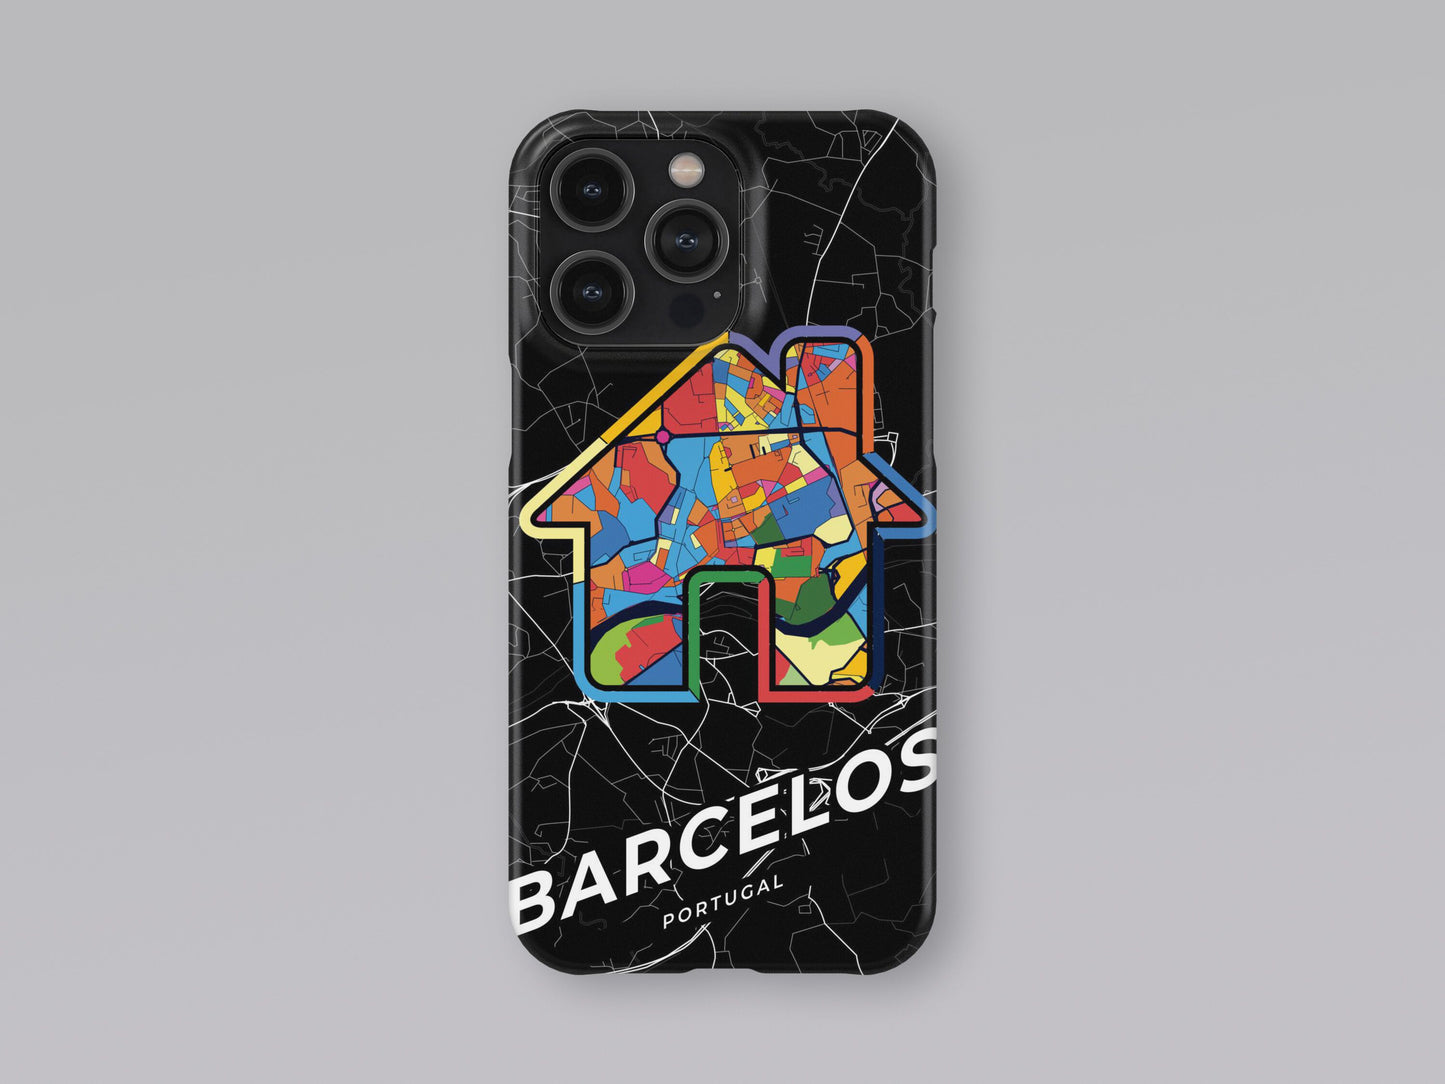 Barcelos Portugal slim phone case with colorful icon. Birthday, wedding or housewarming gift. Couple match cases. 3